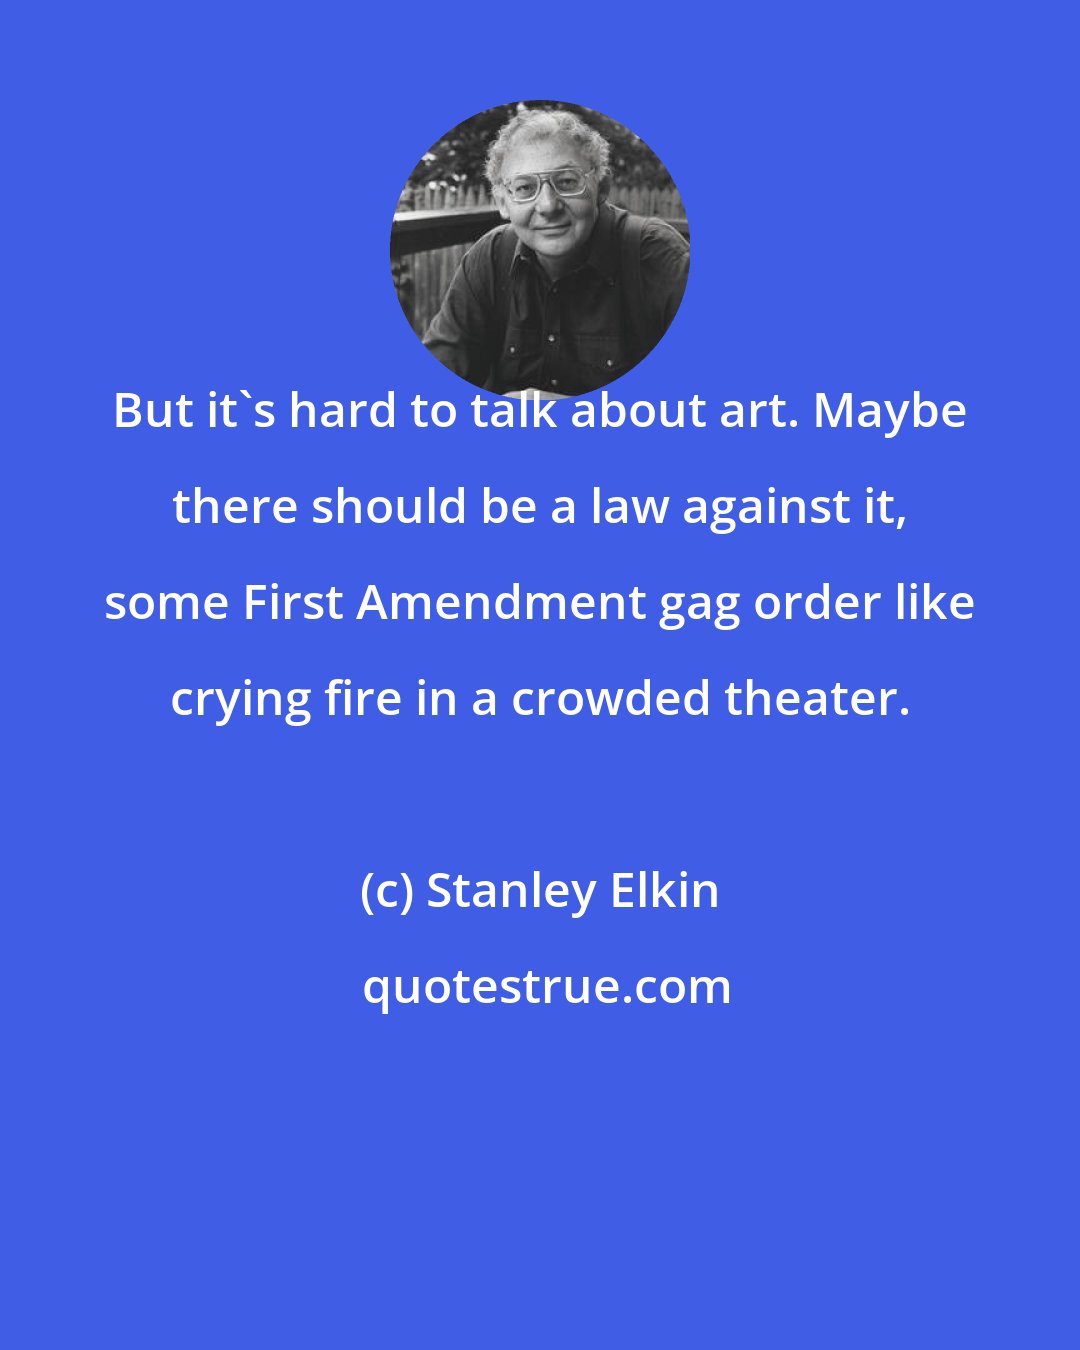 Stanley Elkin: But it's hard to talk about art. Maybe there should be a law against it, some First Amendment gag order like crying fire in a crowded theater.